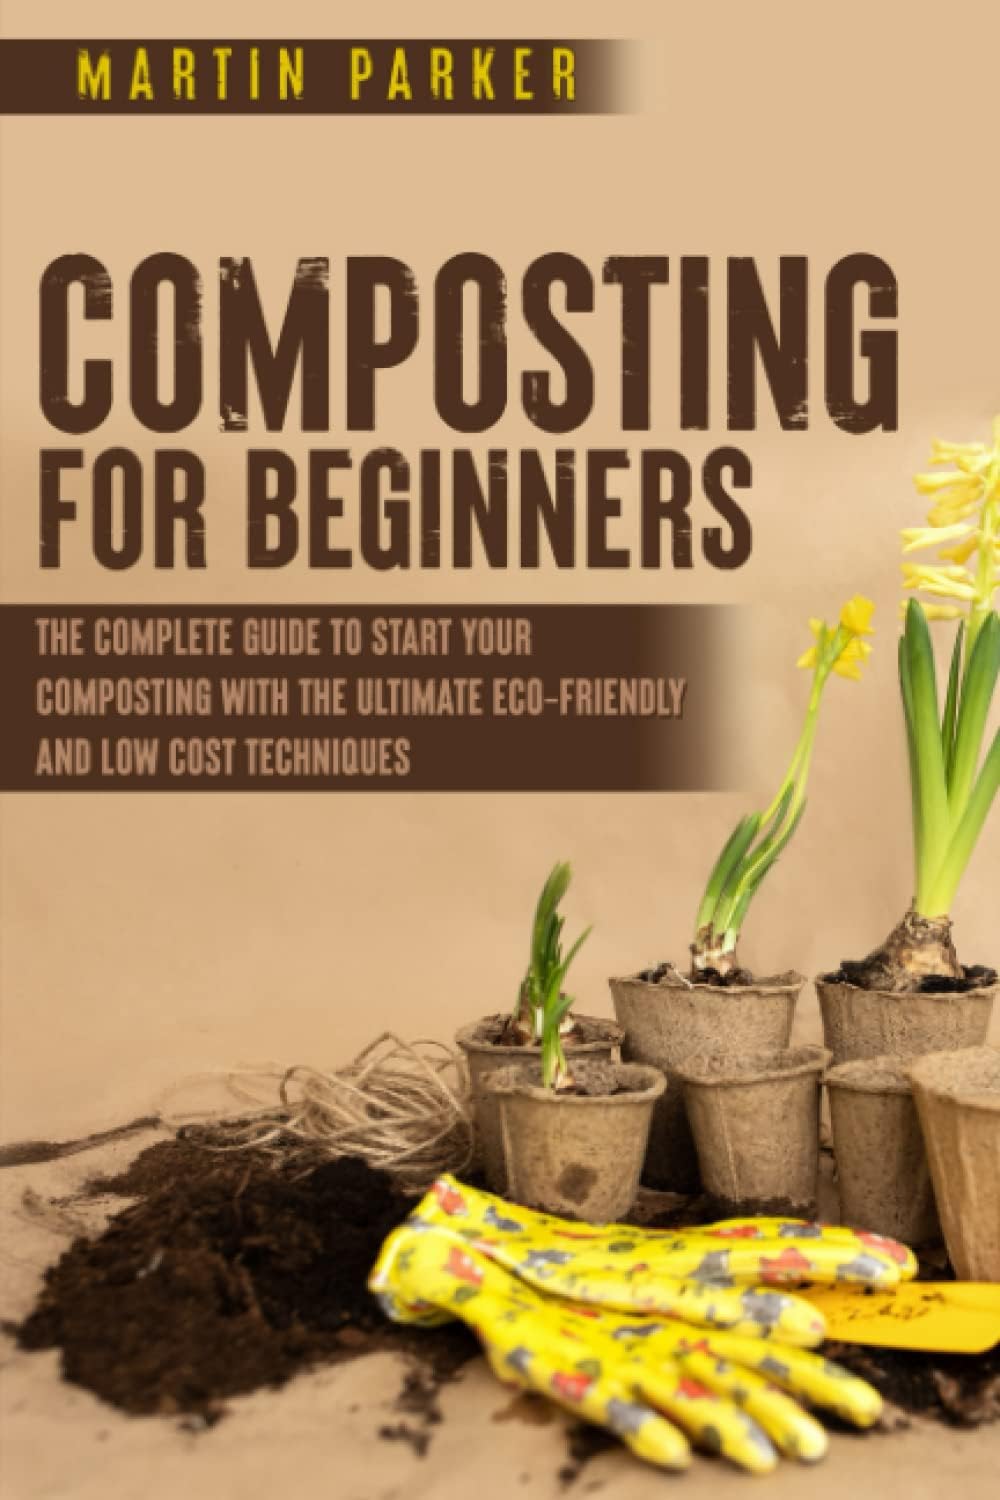 Composting For Beginners Review:  10 Handy Tips